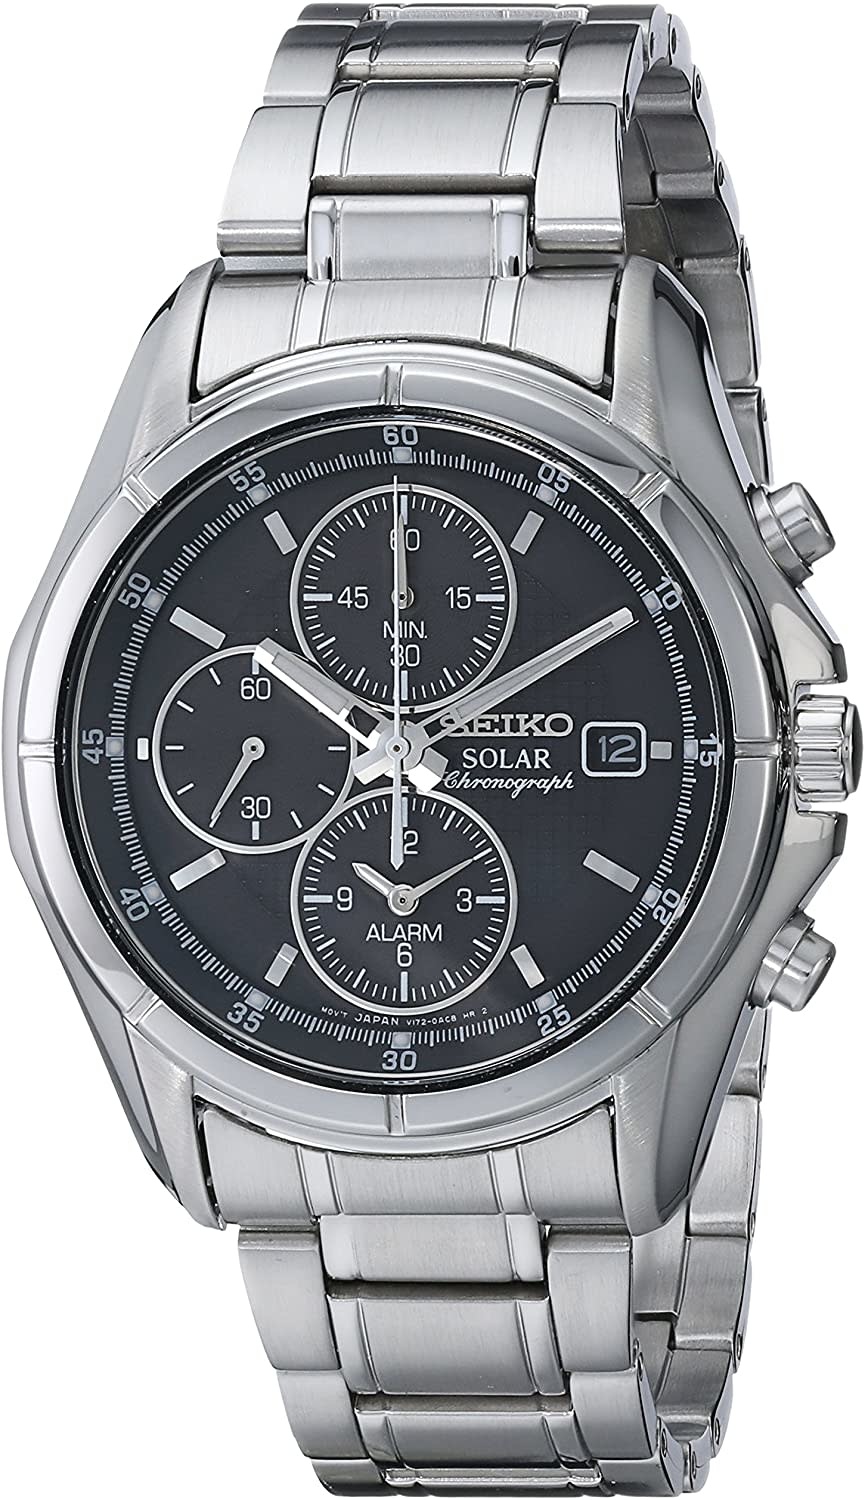 Mens Seiko Solar Chronograph Watch with Stainless Steel Band, 39mm - Snow's  Jewelers Miami Lakes